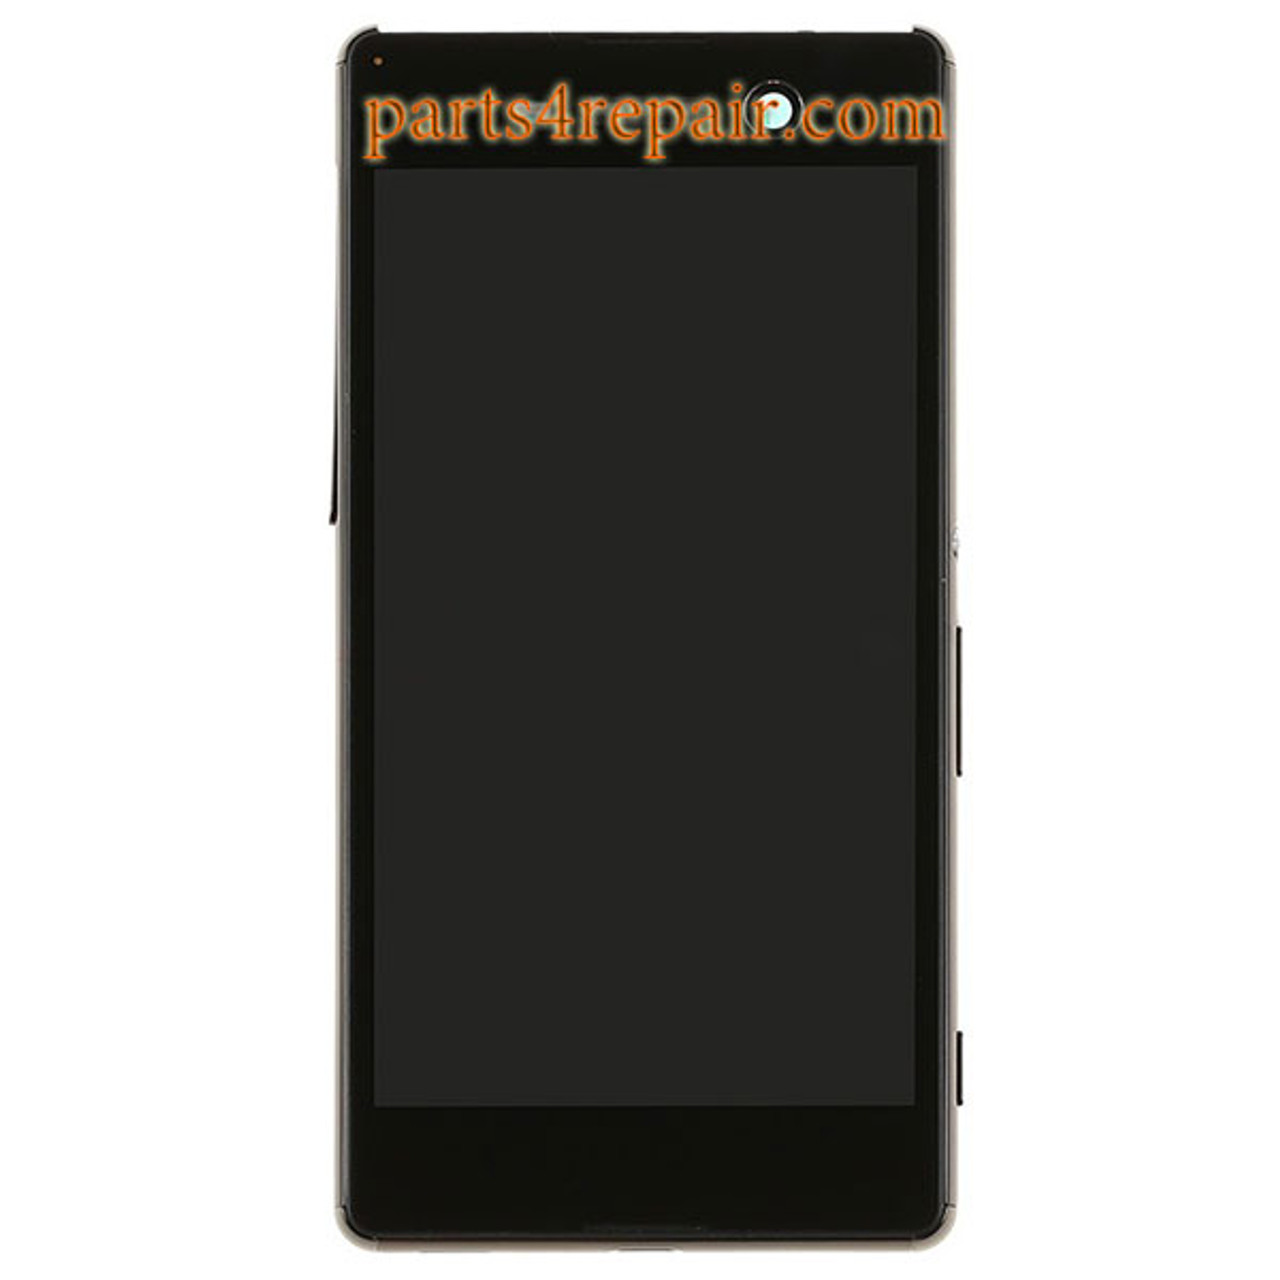 Complete Screen Assembly with Bezel for Sony Xperia M5 E5603 E5606 -Black - Parts4repair.Com